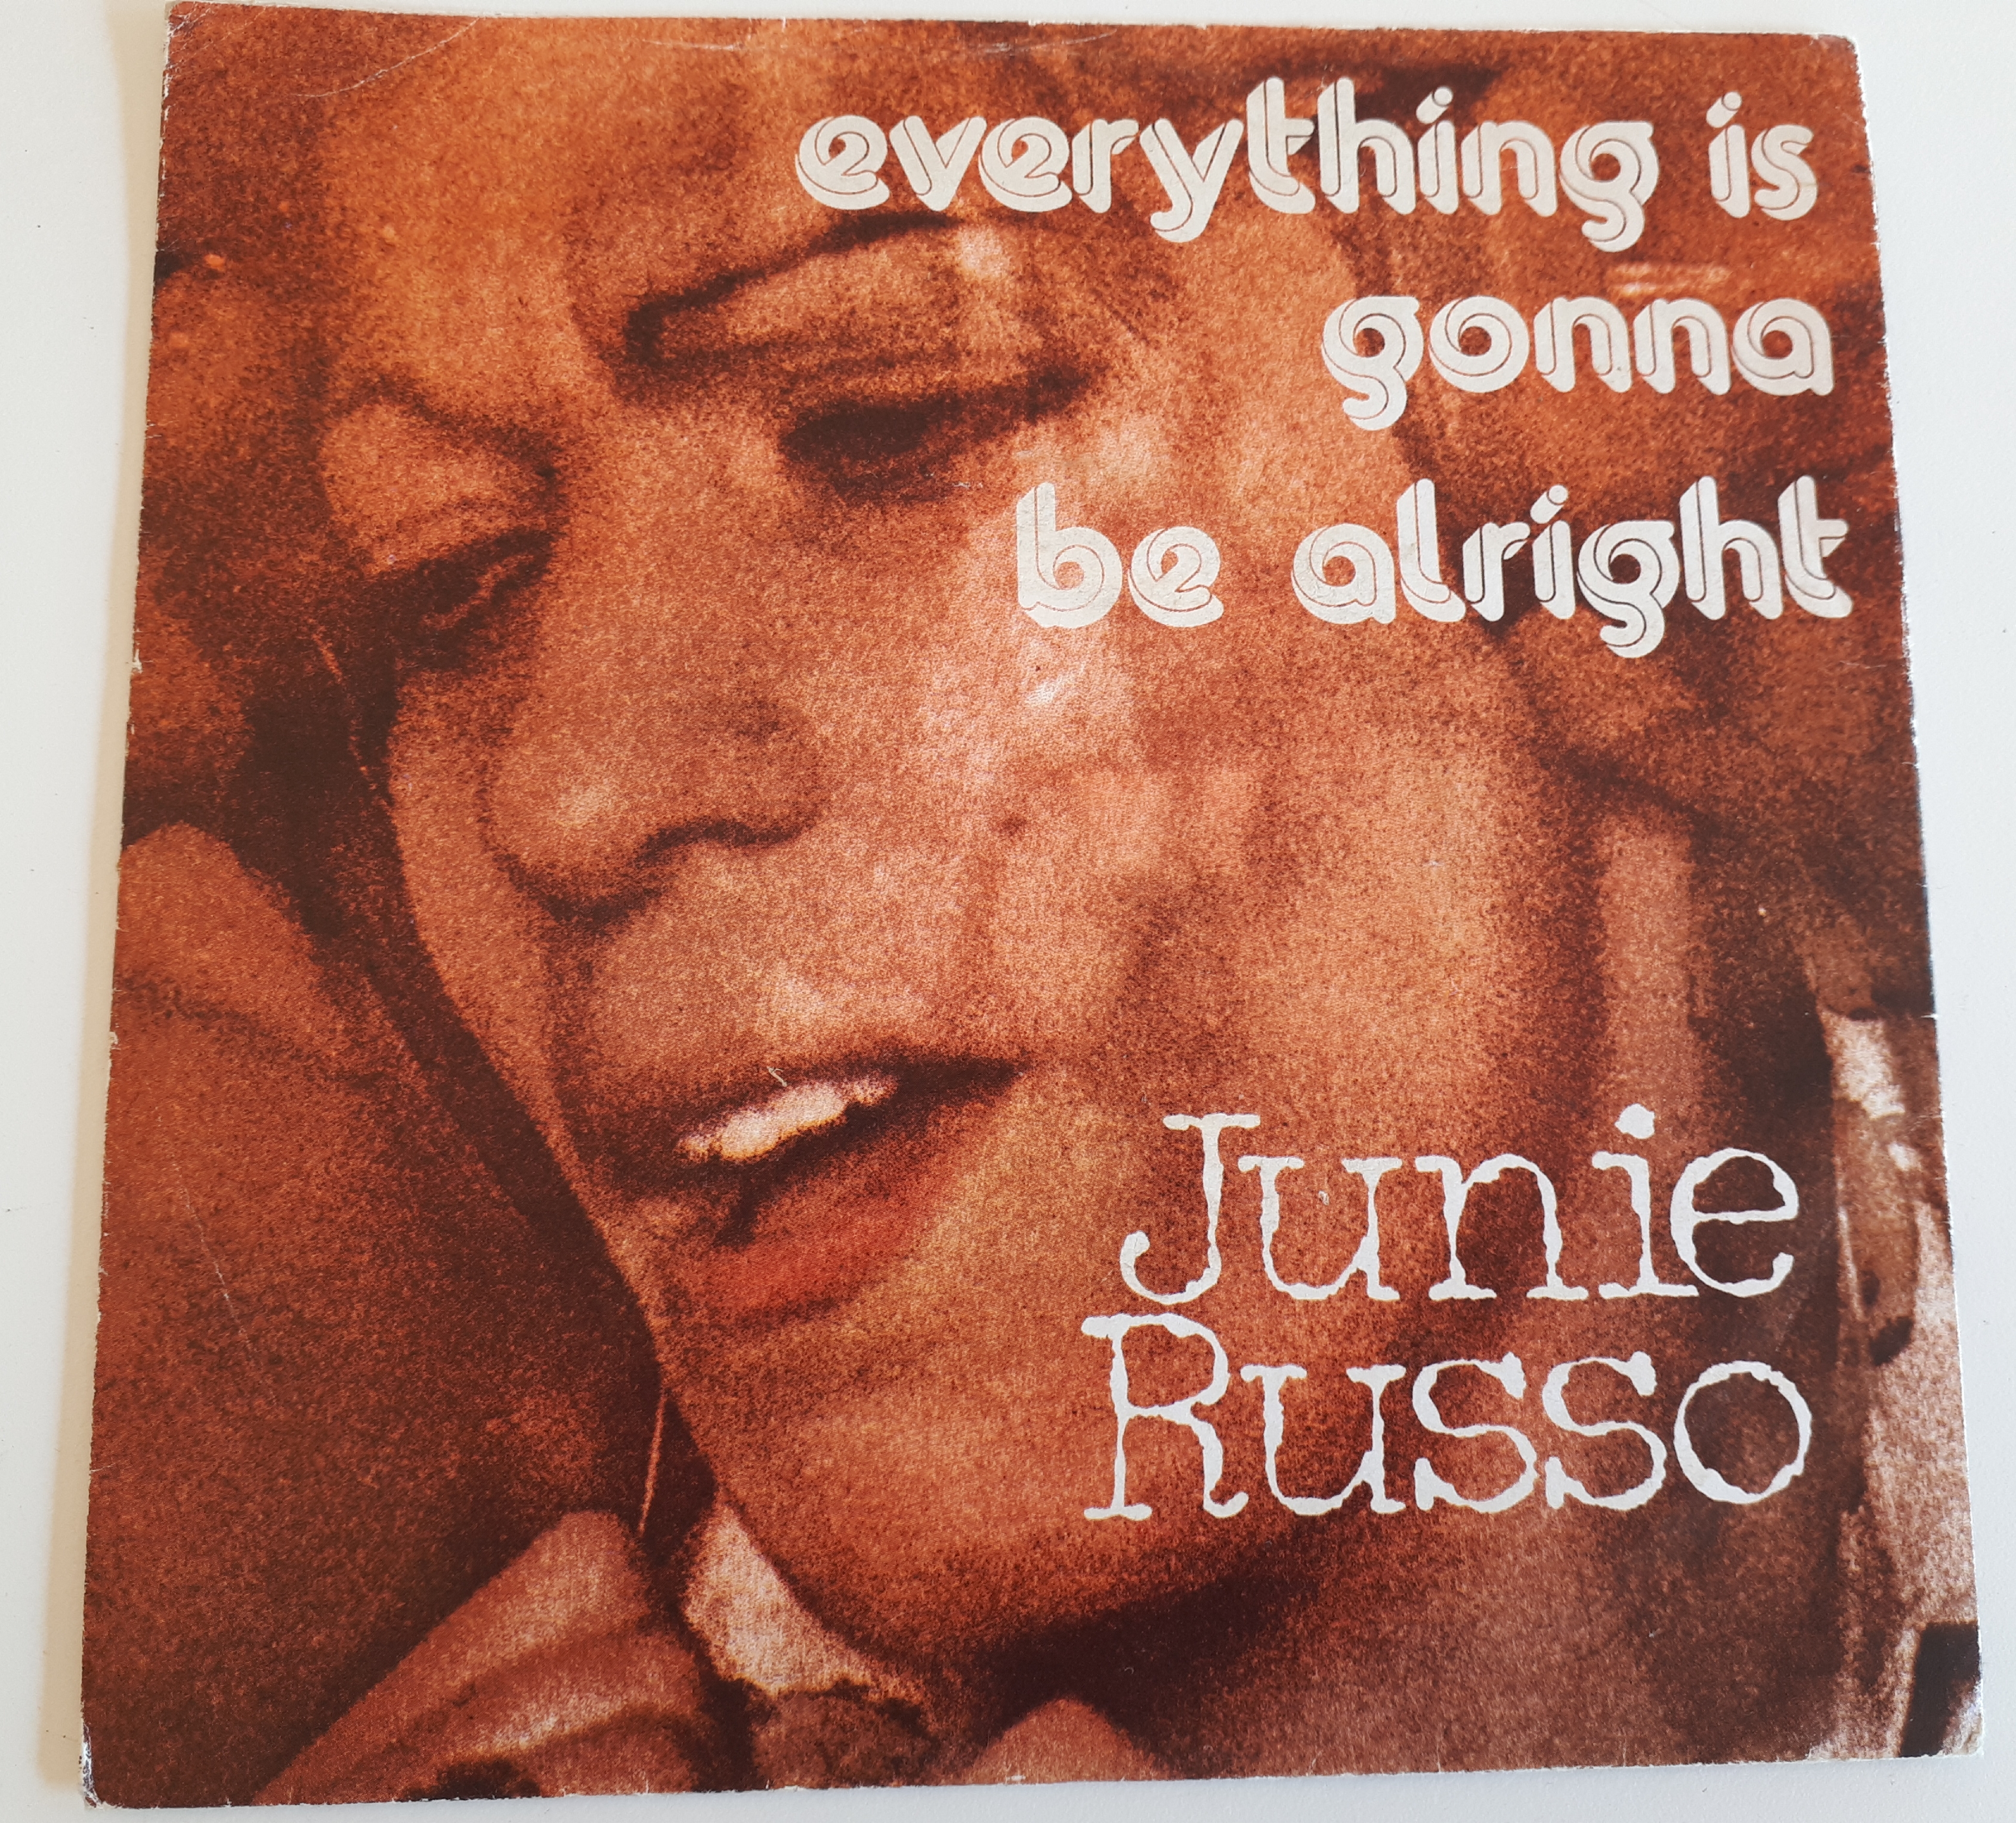 Junie Russo (Giuni Russo) - Everything is gonna be alright